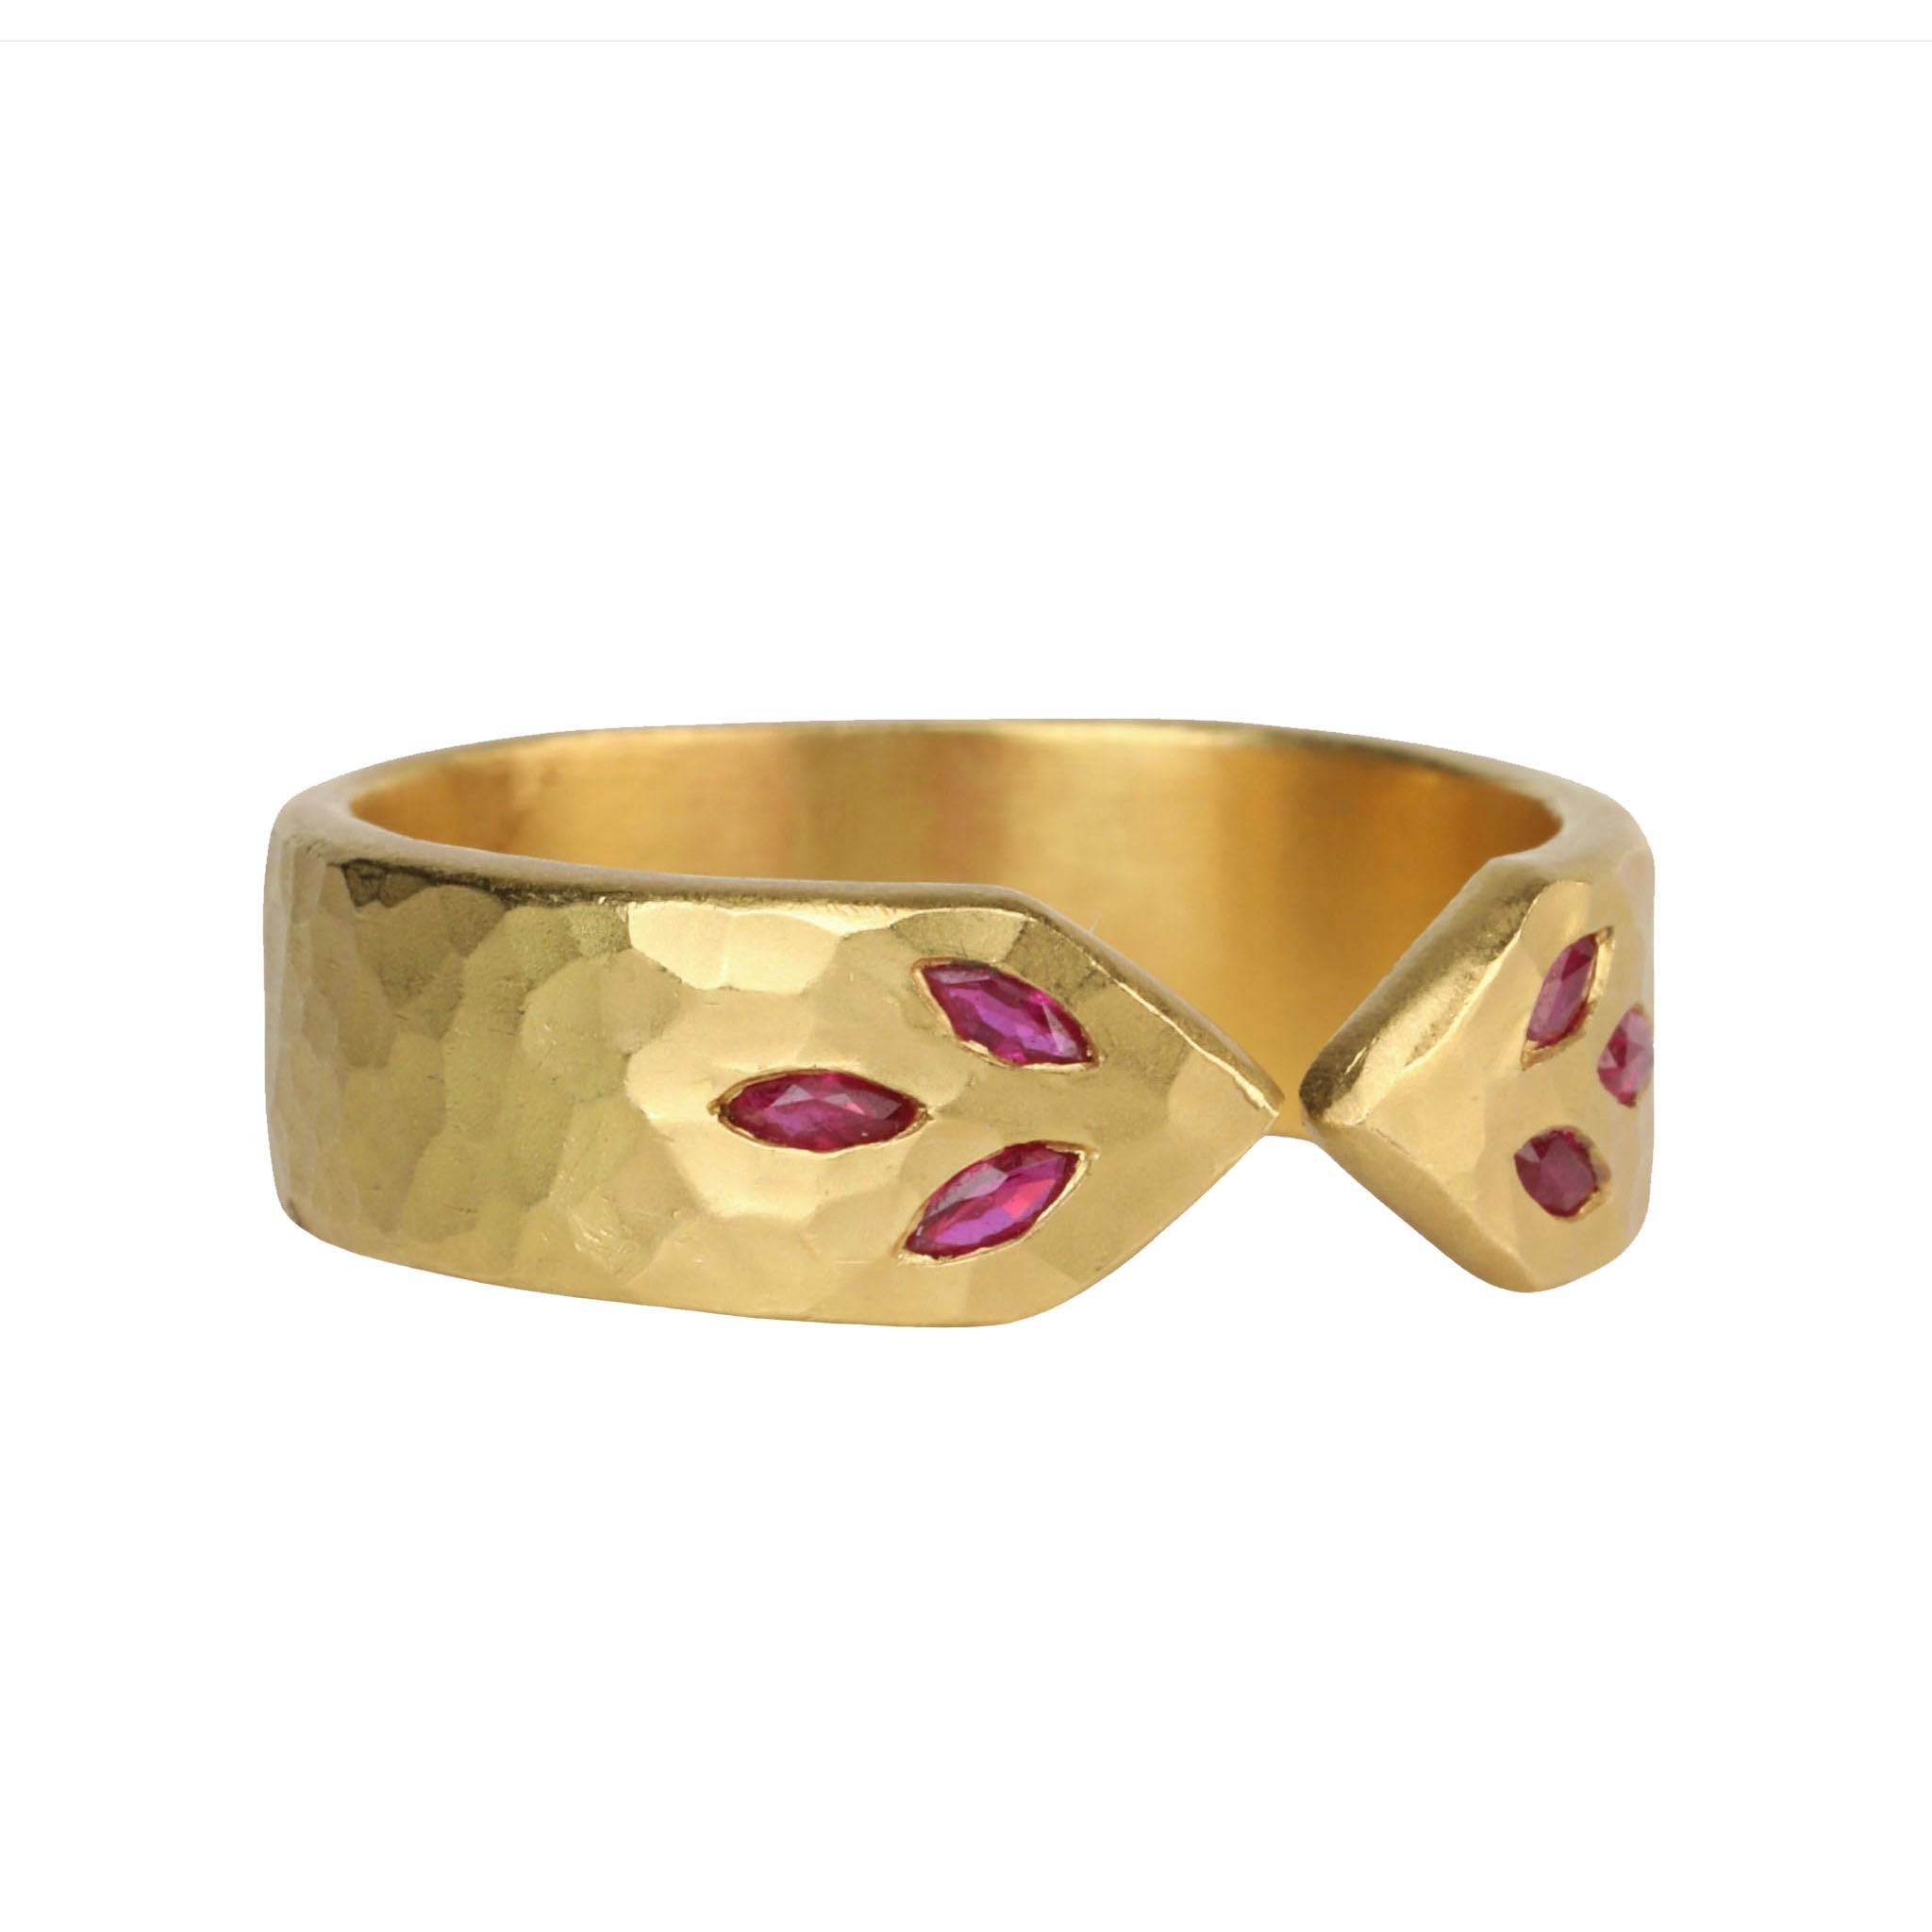 22K Gold Hammered Open Ring with Marquise Ruby "Leaf" Details - Peridot Fine Jewelry - Cathy Waterman